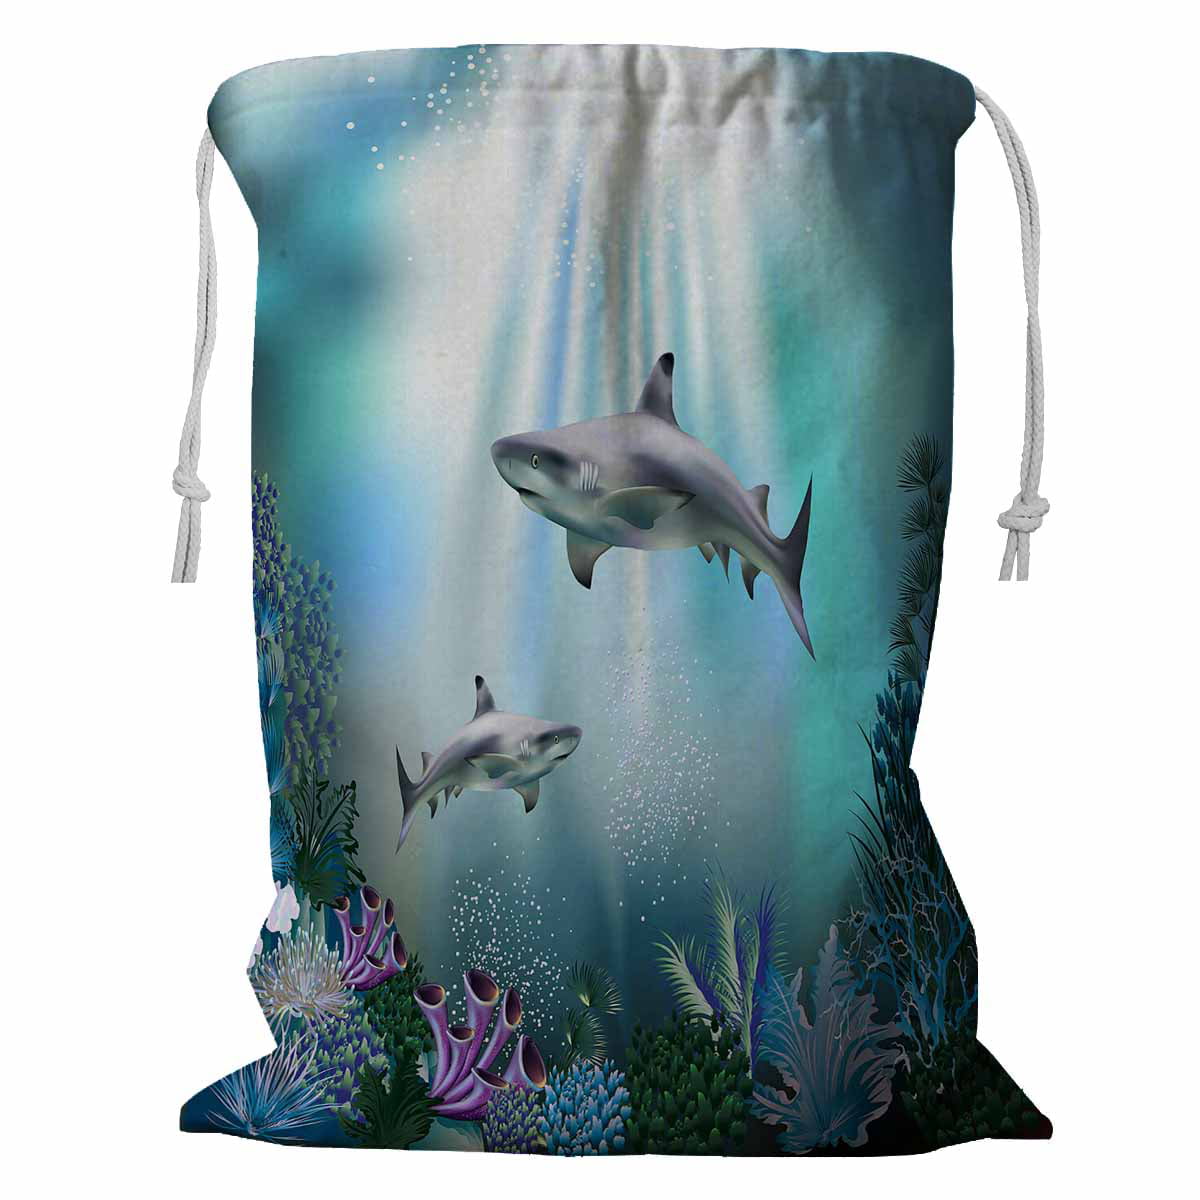 Details about   Multi-Purpose Laundry Bags Shark Animal Shaped Cute Portable Laundry Toys Bags 